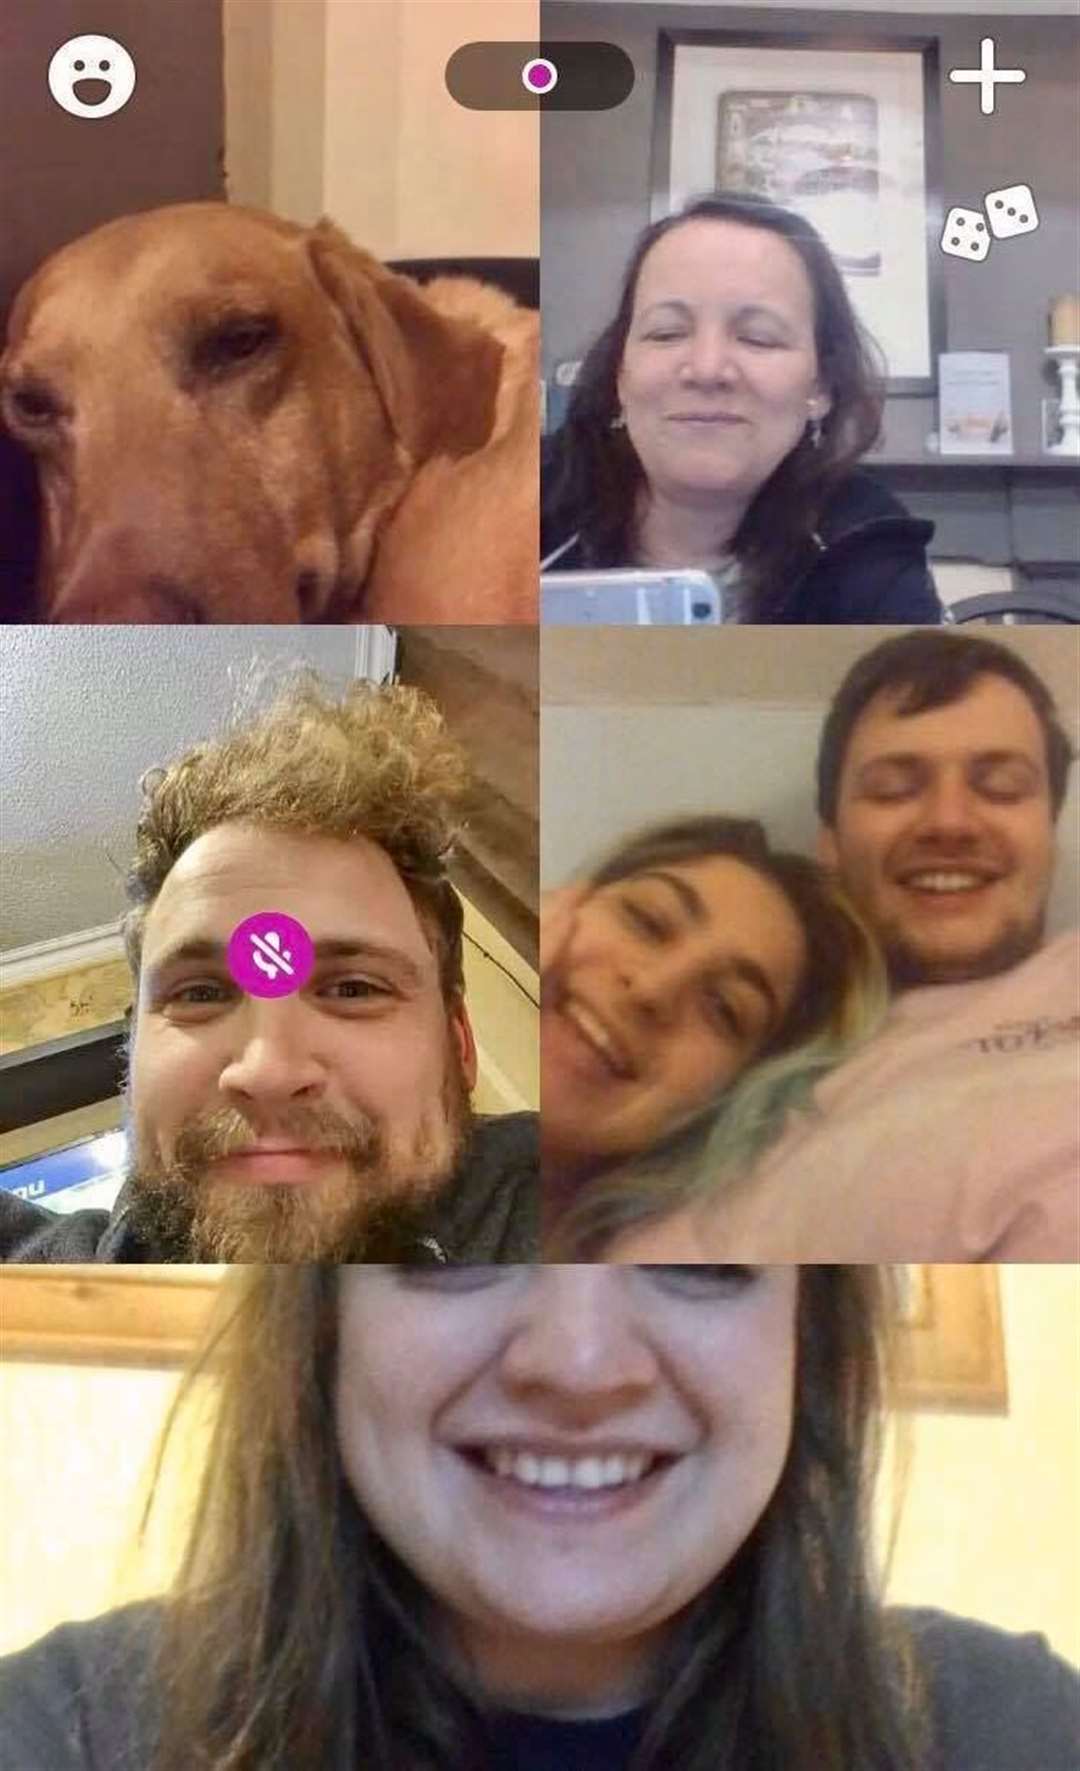 Houseparty video calling in KoL senior features writer Angela Cole's home during lockdown